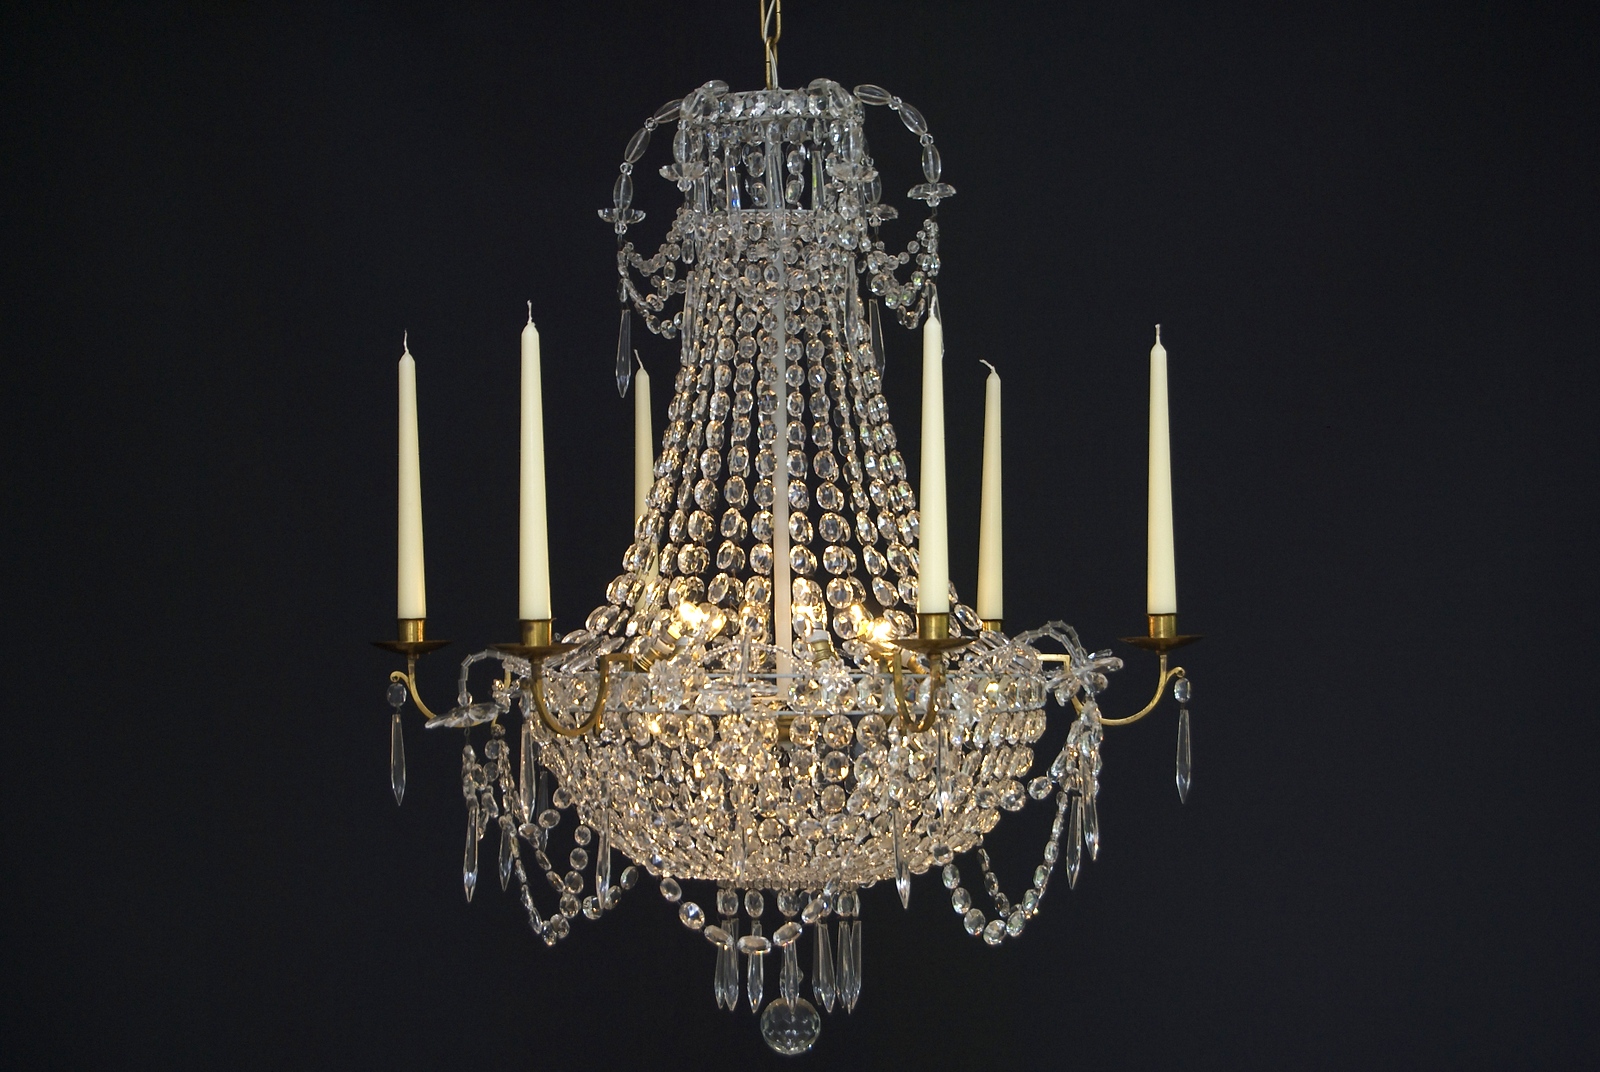 A 20th century French chandelier with 9 light and 6 candles